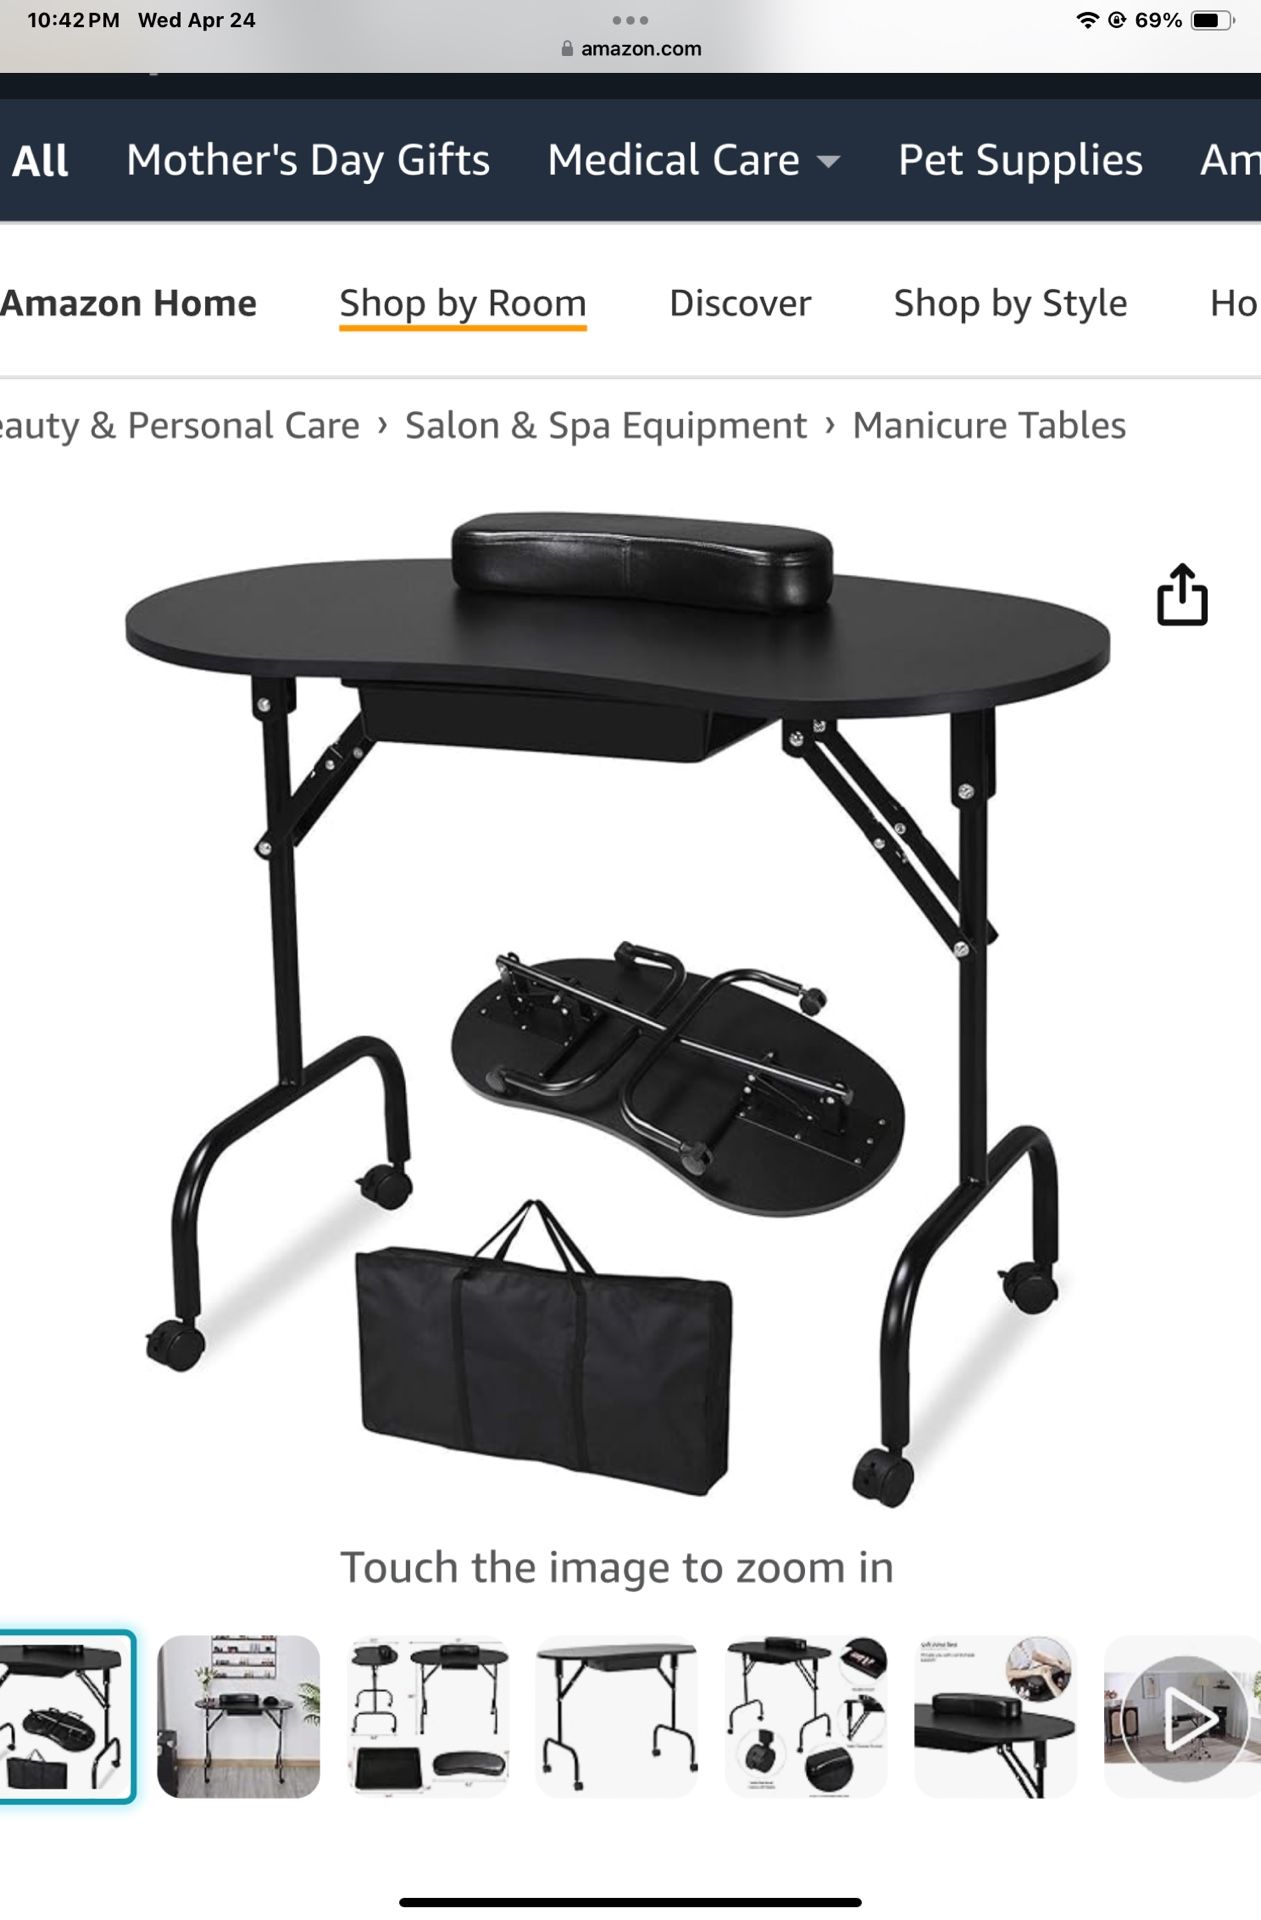 New Portable Manicure Table Black